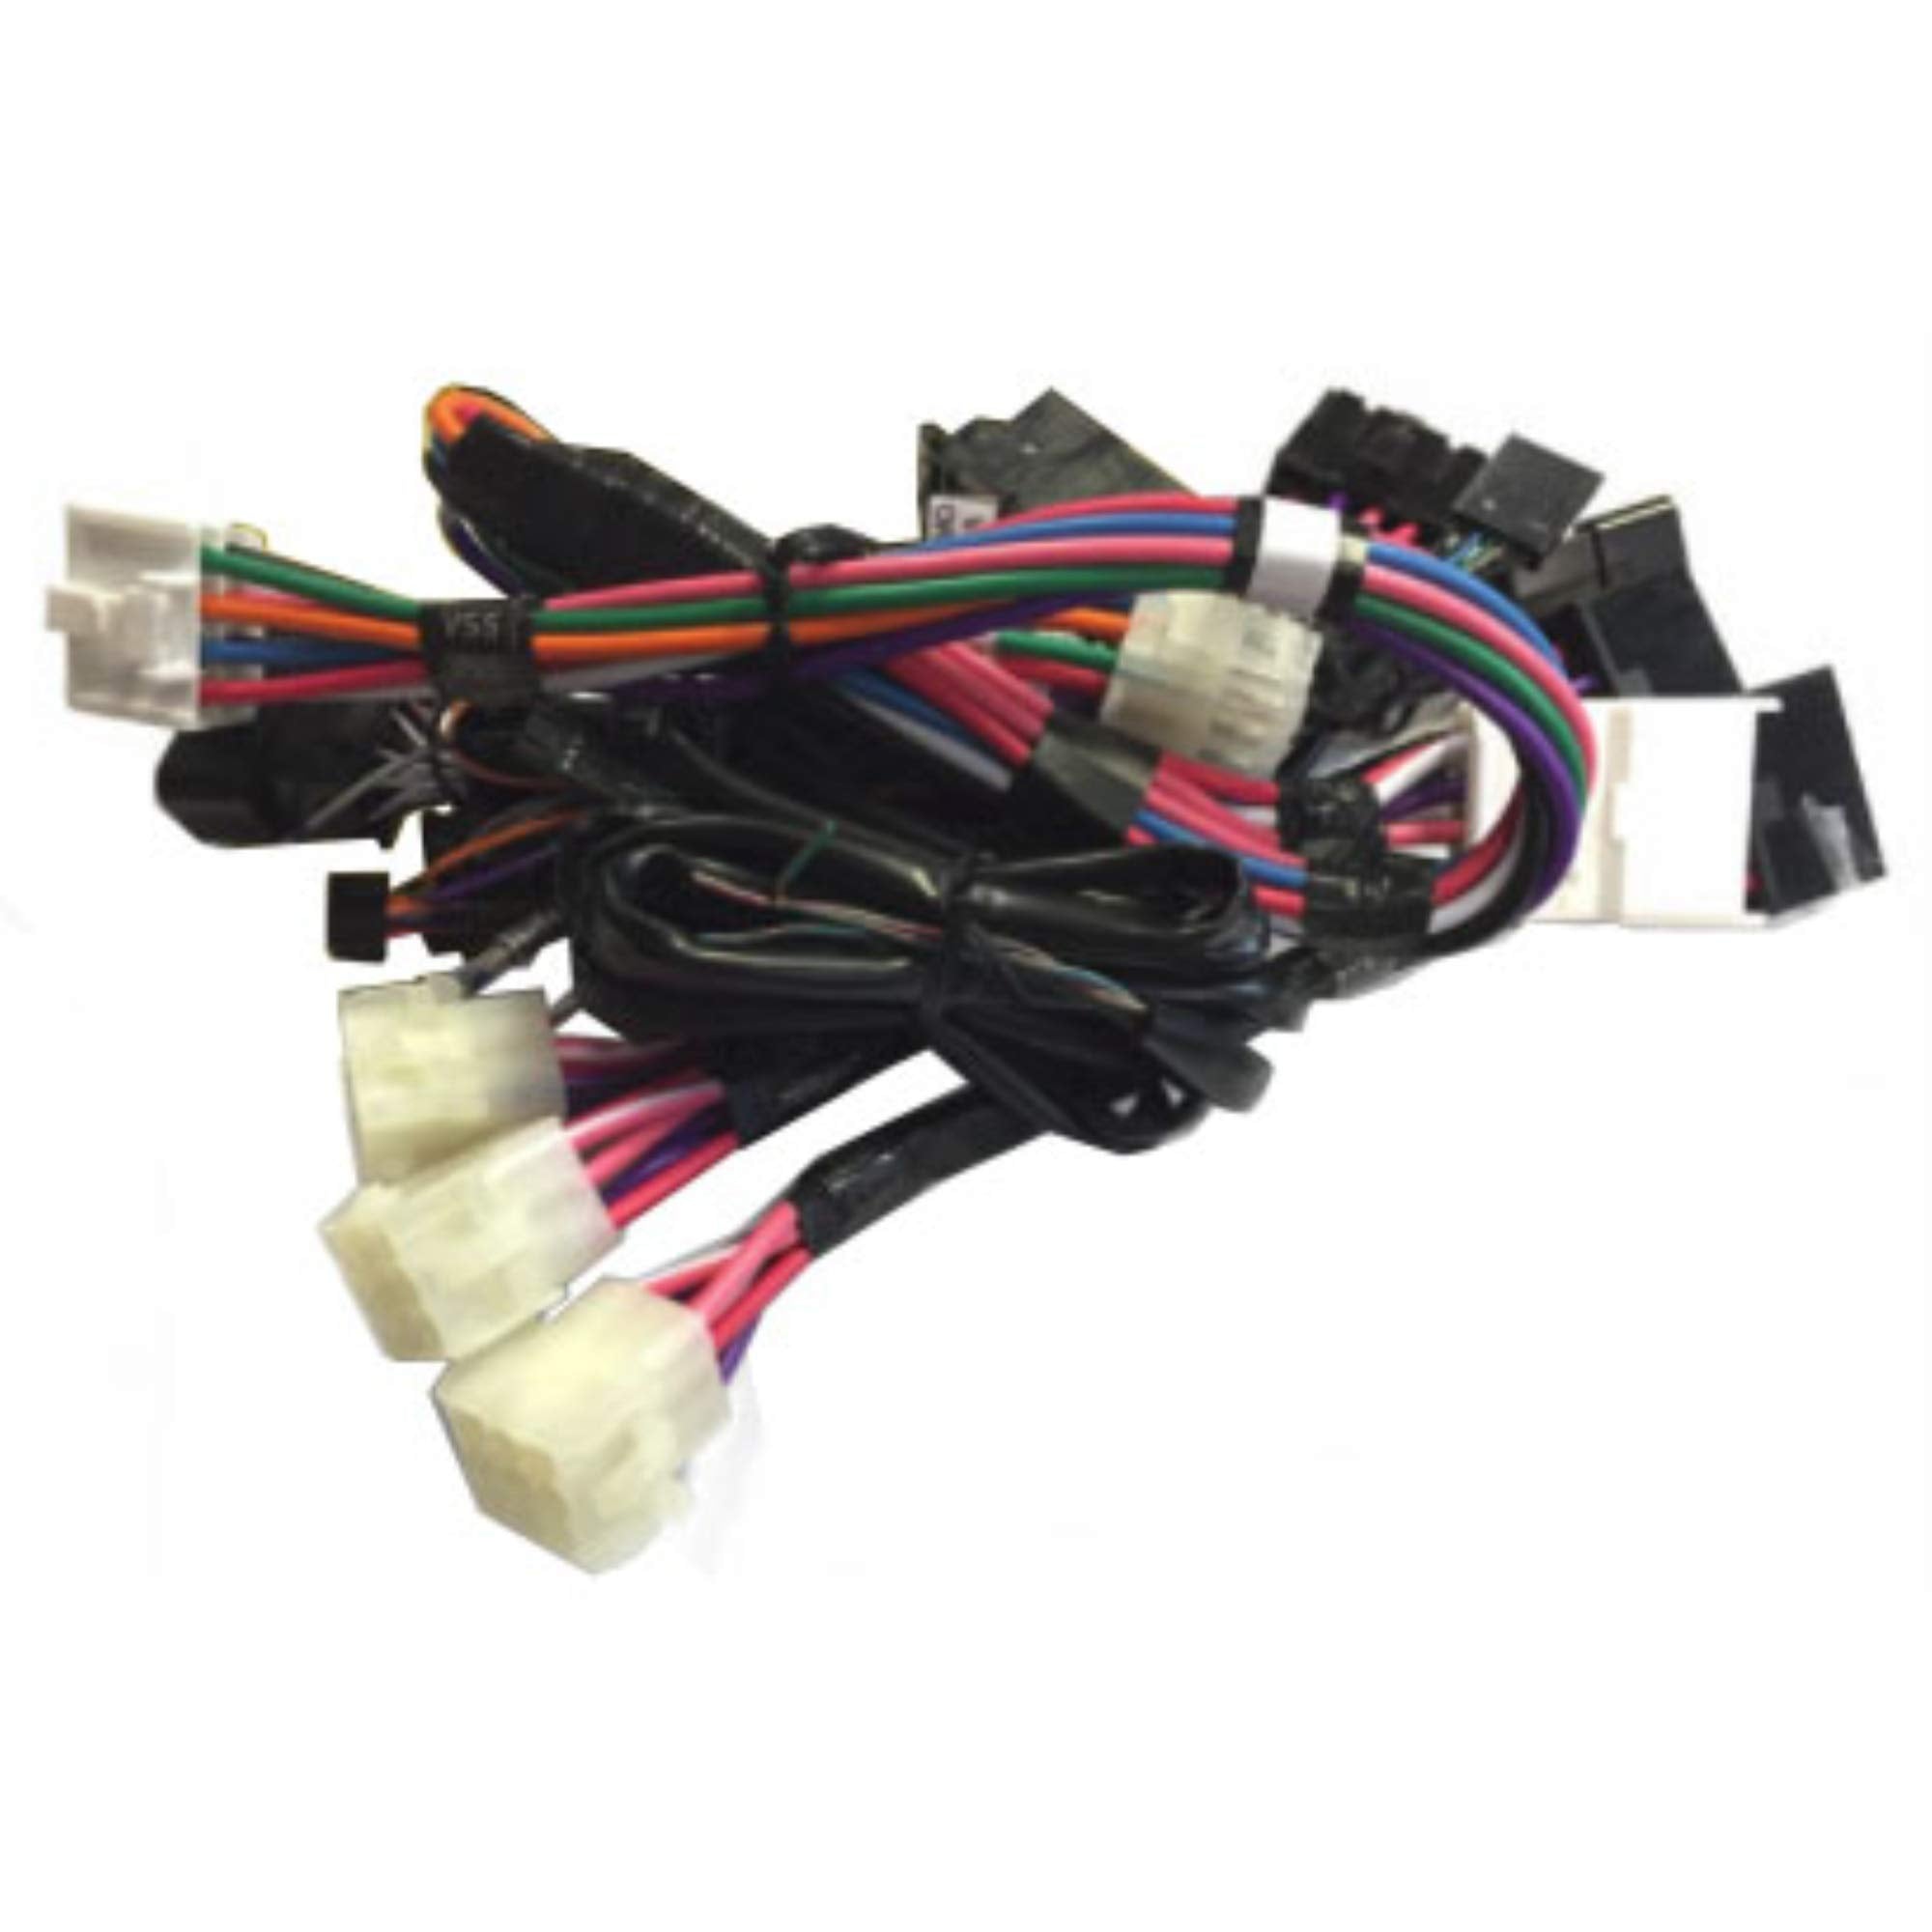 iDatastart ADS-THR-TL5 Remote start T-harness for select 2010-up Toyota and Scion vehicles with standard ignition (CMHCXA0 module also required)